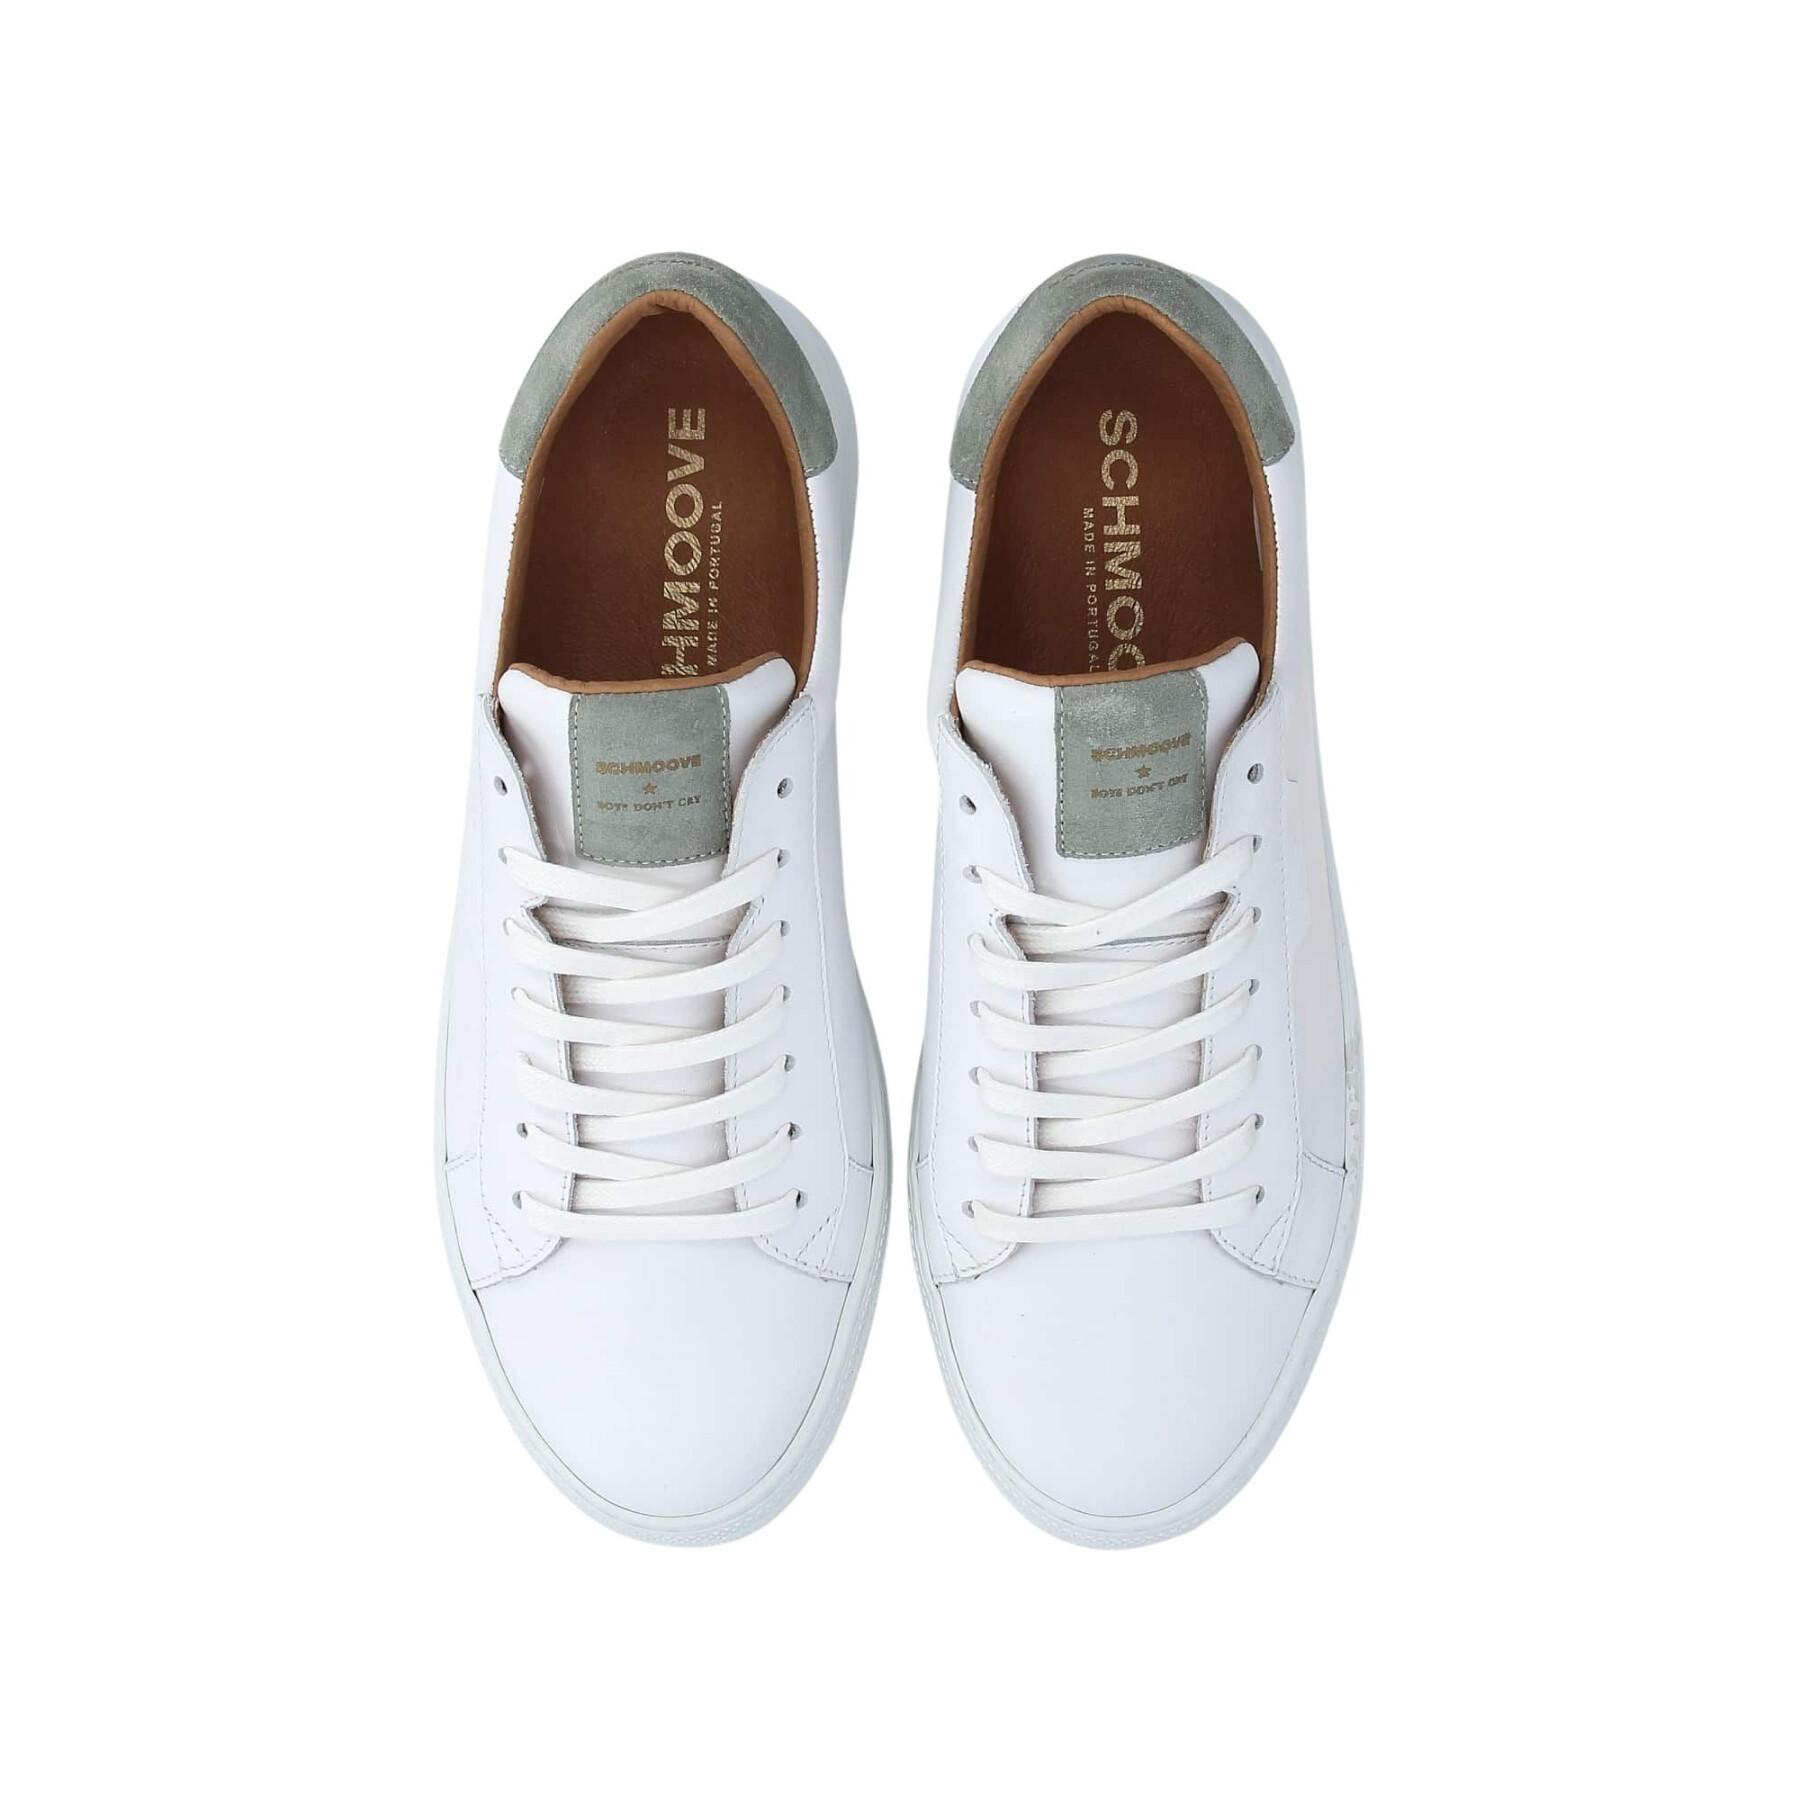 Trainers Schmoove Spark clay nappa/suede